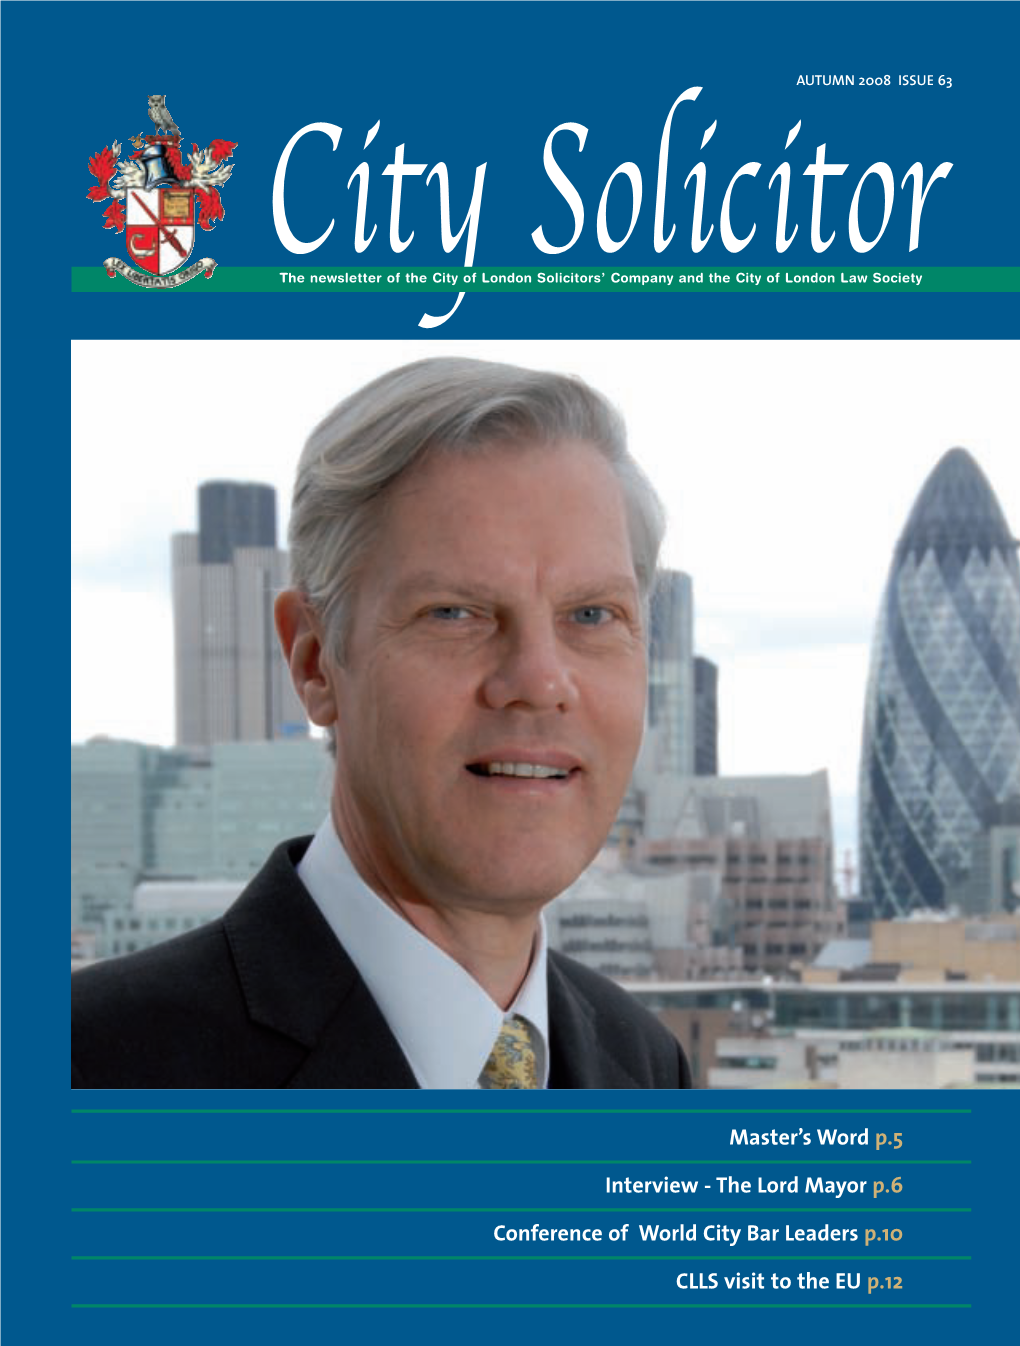 The Lord Mayor P.6 Conference of World City Bar Leaders P.10 CLLS Visit to the EU P.12